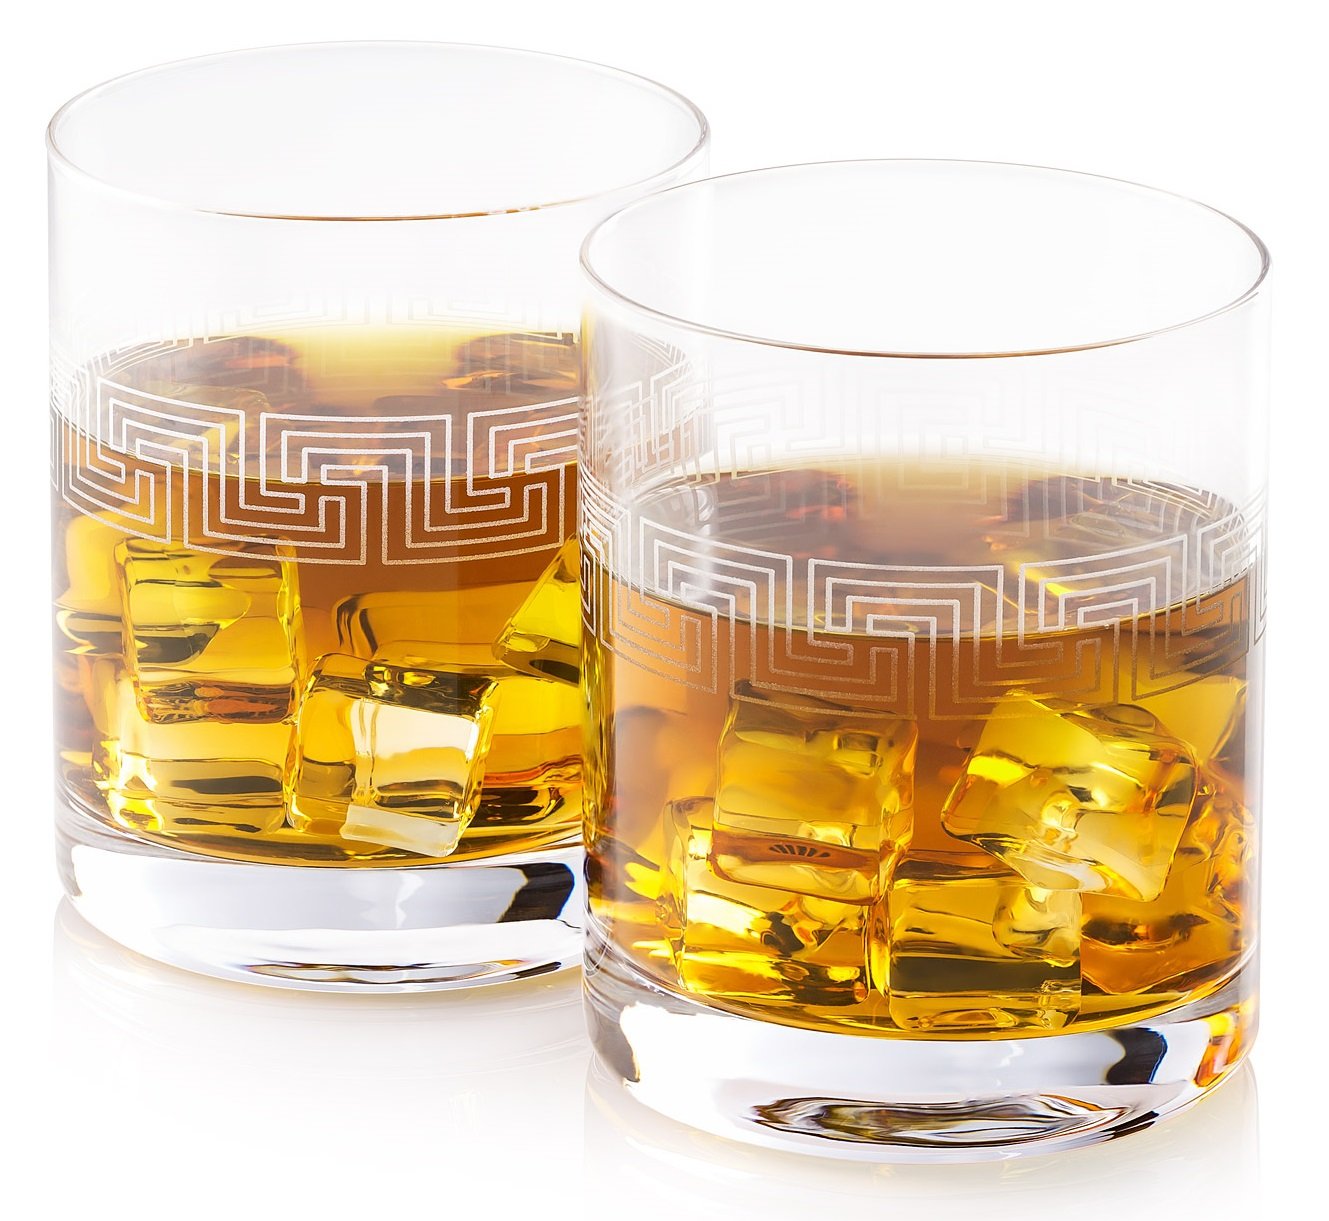 Hand Etched Whiskey Glasses BROM | Made in Europe | Ancient Greek Key Pattern | Set of 2 x 10.8 oz Old Fashioned Glasses | Gift Box.